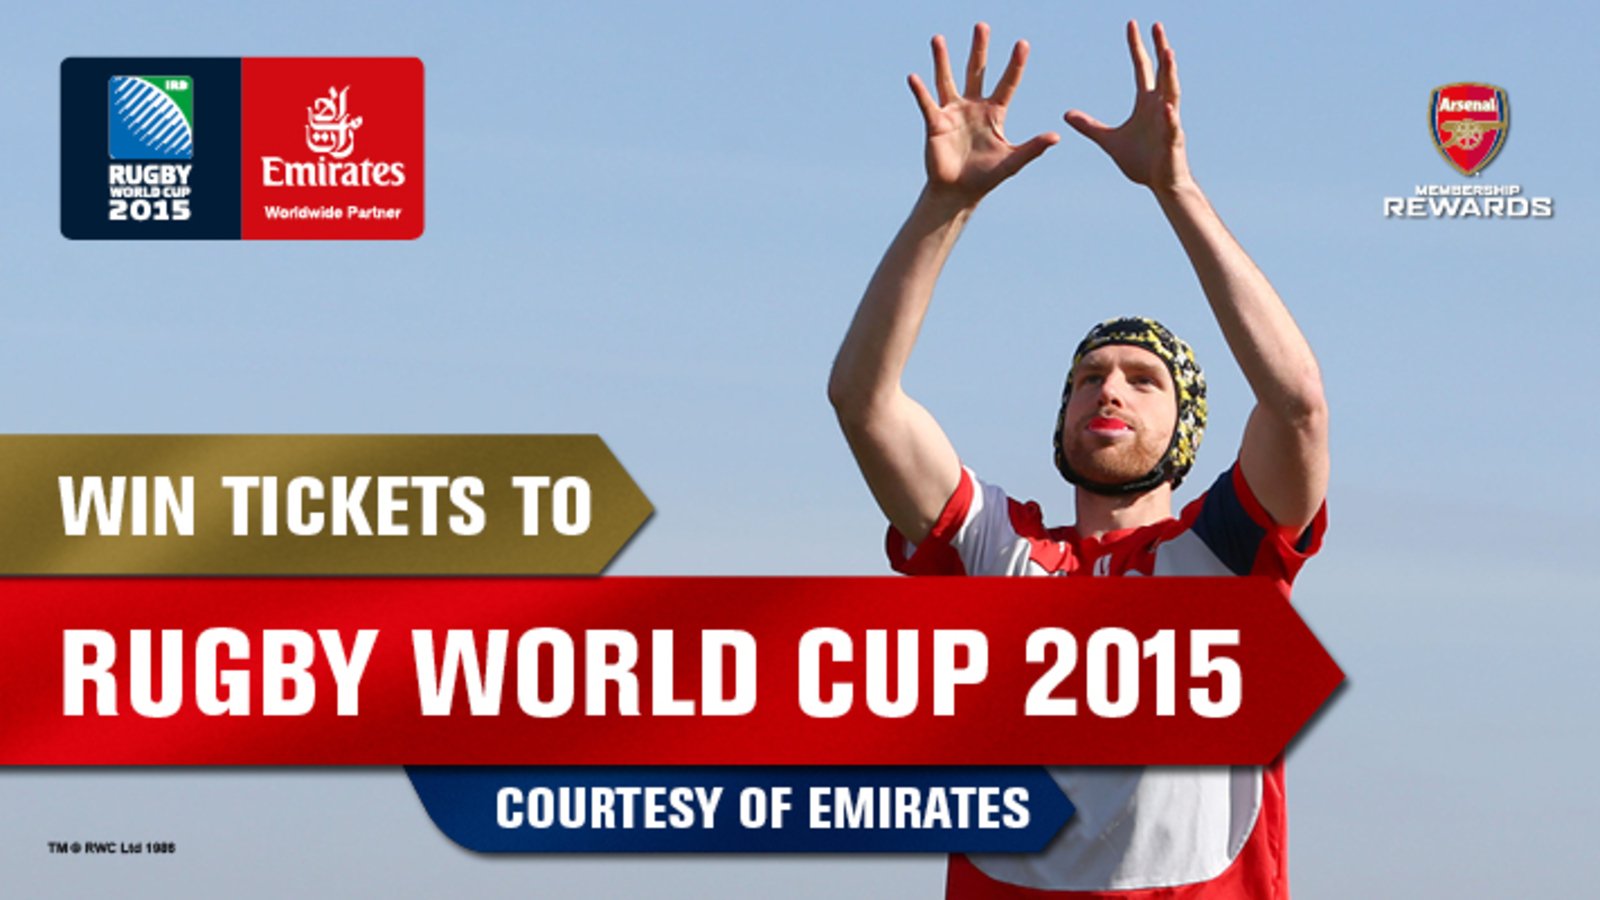 Win Rugby World Cup 2015 tickets News Arsenal